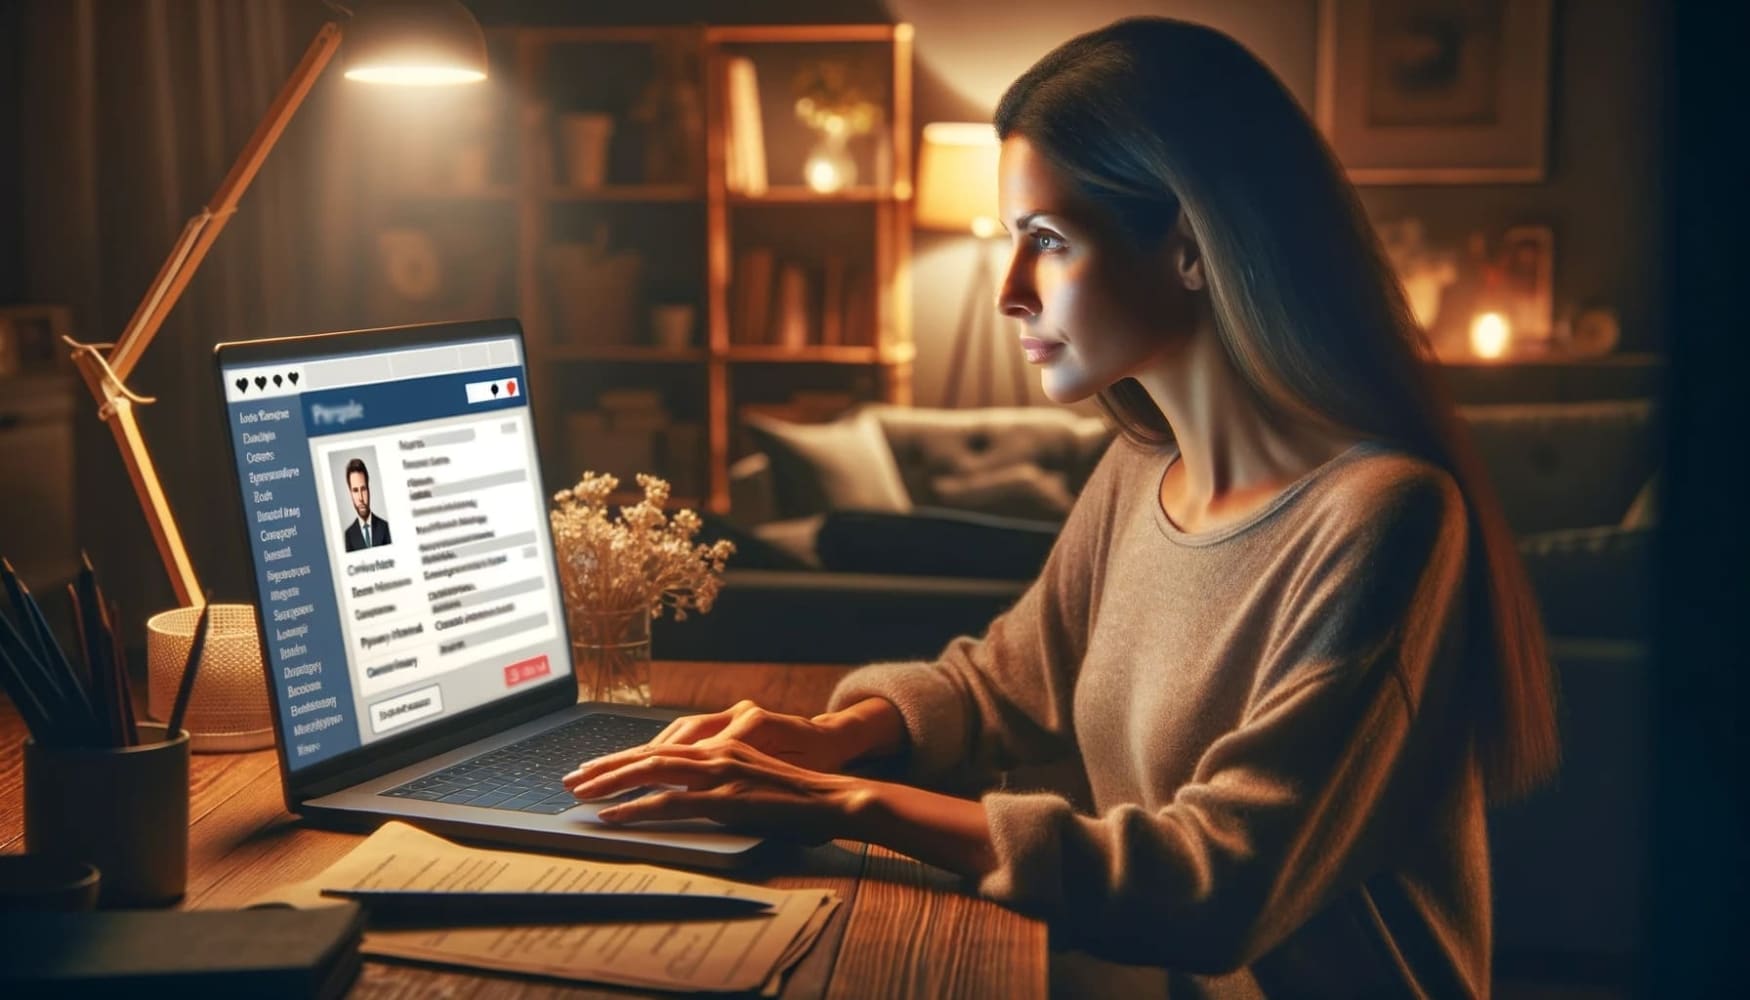 Image of a young woman, sitting at a home office desk with a laptop. The laptop screen showing various forms of personal information such as criminal records, employment history, and educational background, as she conducts an online background check. The scene depict a cozy, modern home office environment with a warm, inviting atmosphere. The glow from the computer screen illuminates her face, highlighting her concentration and the importance of safety in online dating